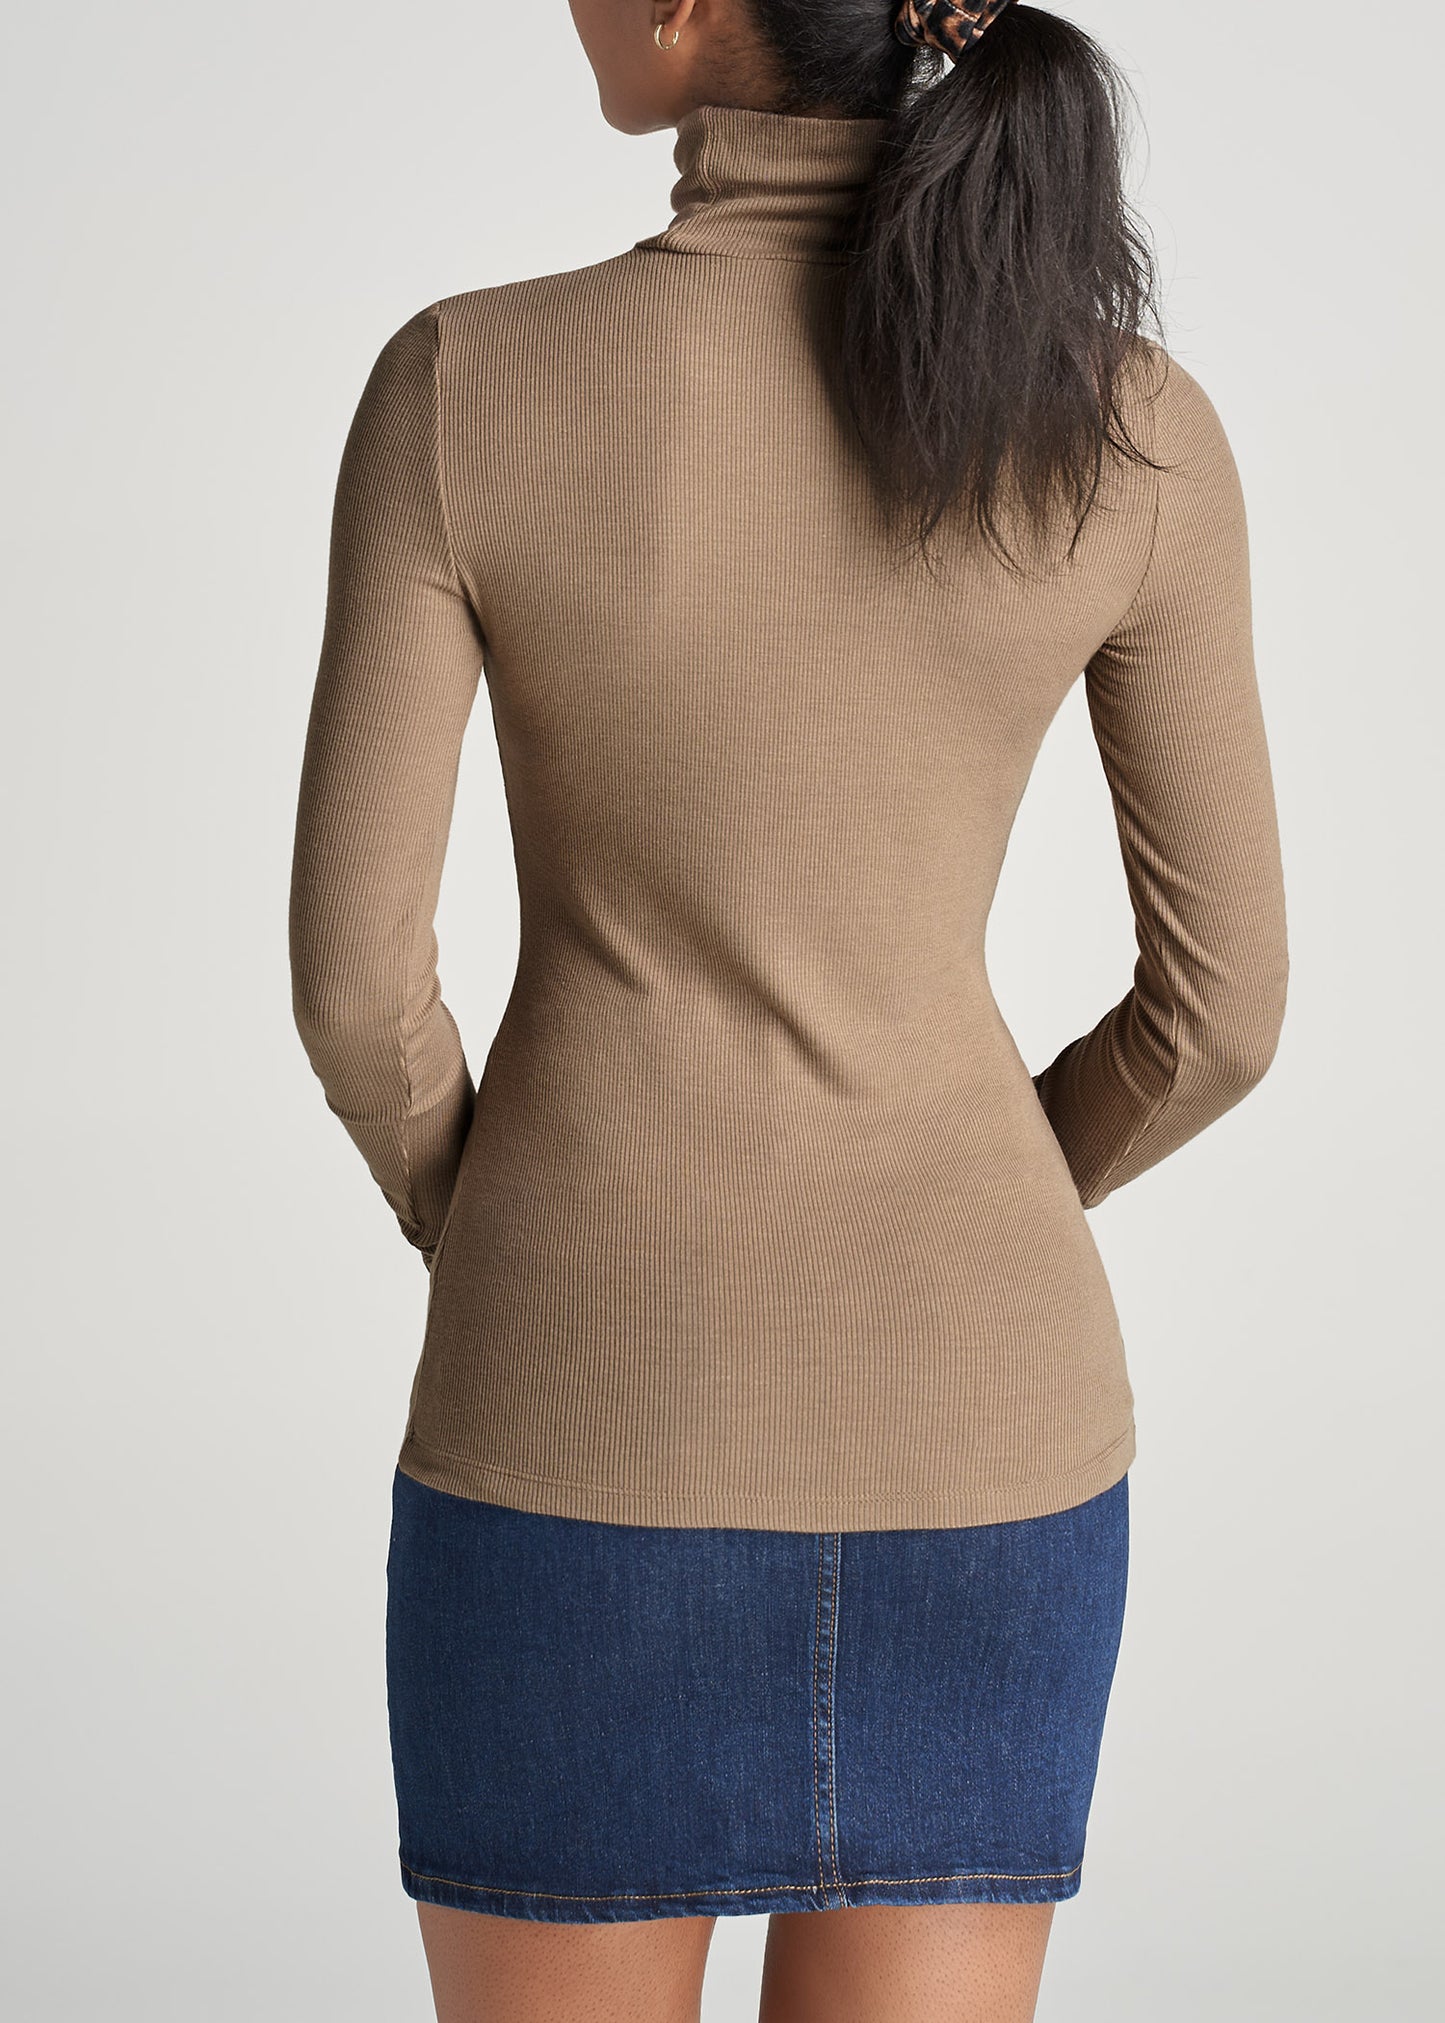 American-Tall-Women-Fitted-LongSleeve-Ribbed-TurtleNeck-Latte-back